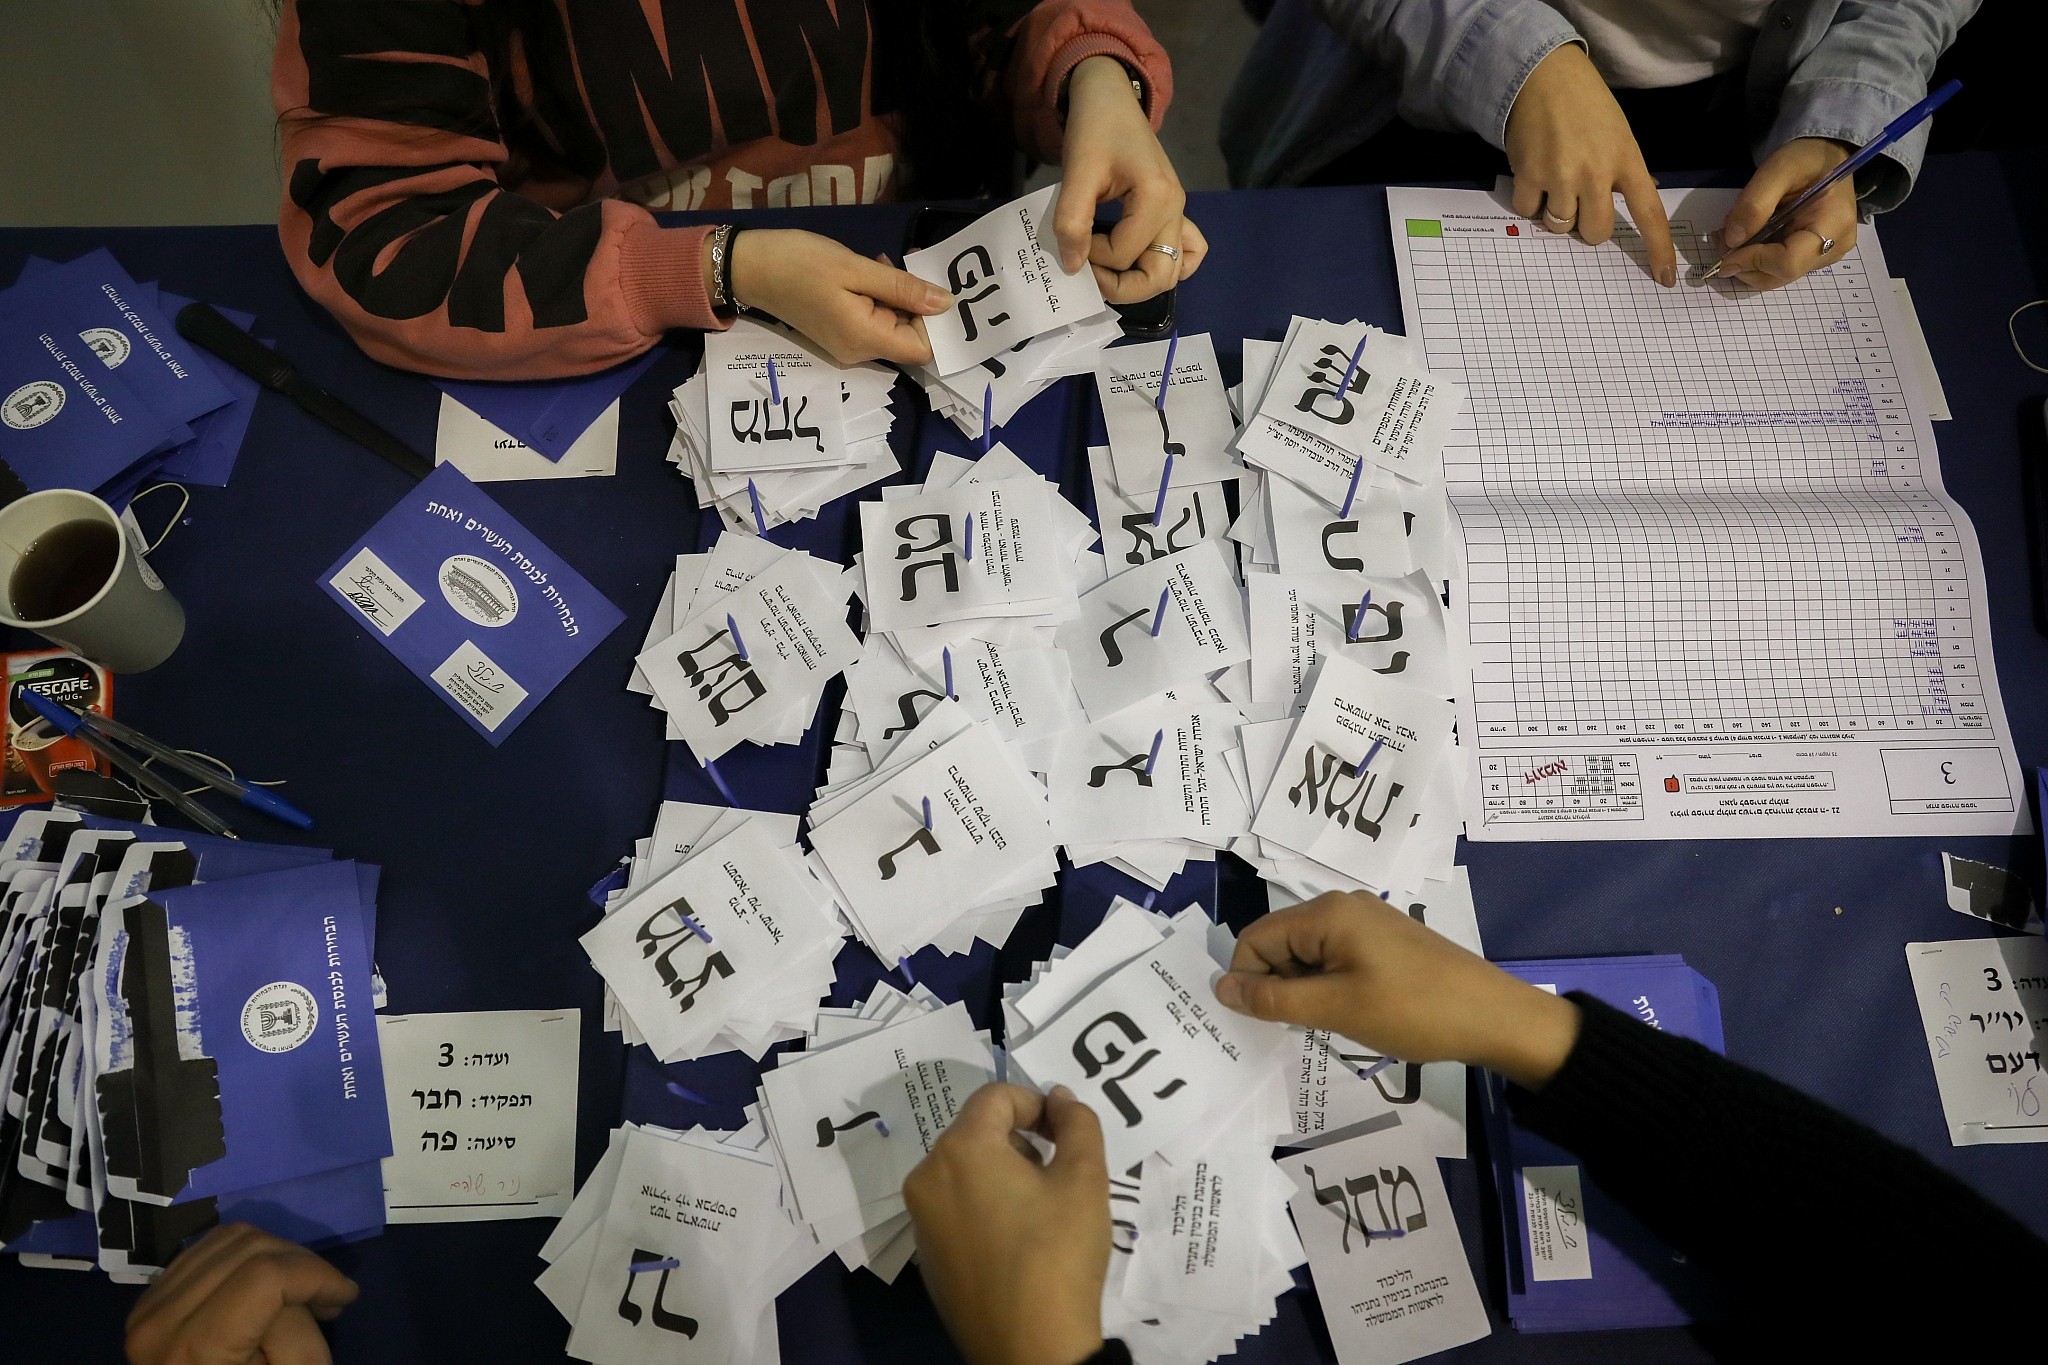 The remaining ballots from soldiers and absentees being counted at the Knesset on April 10, 2019, a day after the general elections, (Noam Revkin Fenton/Flash90)